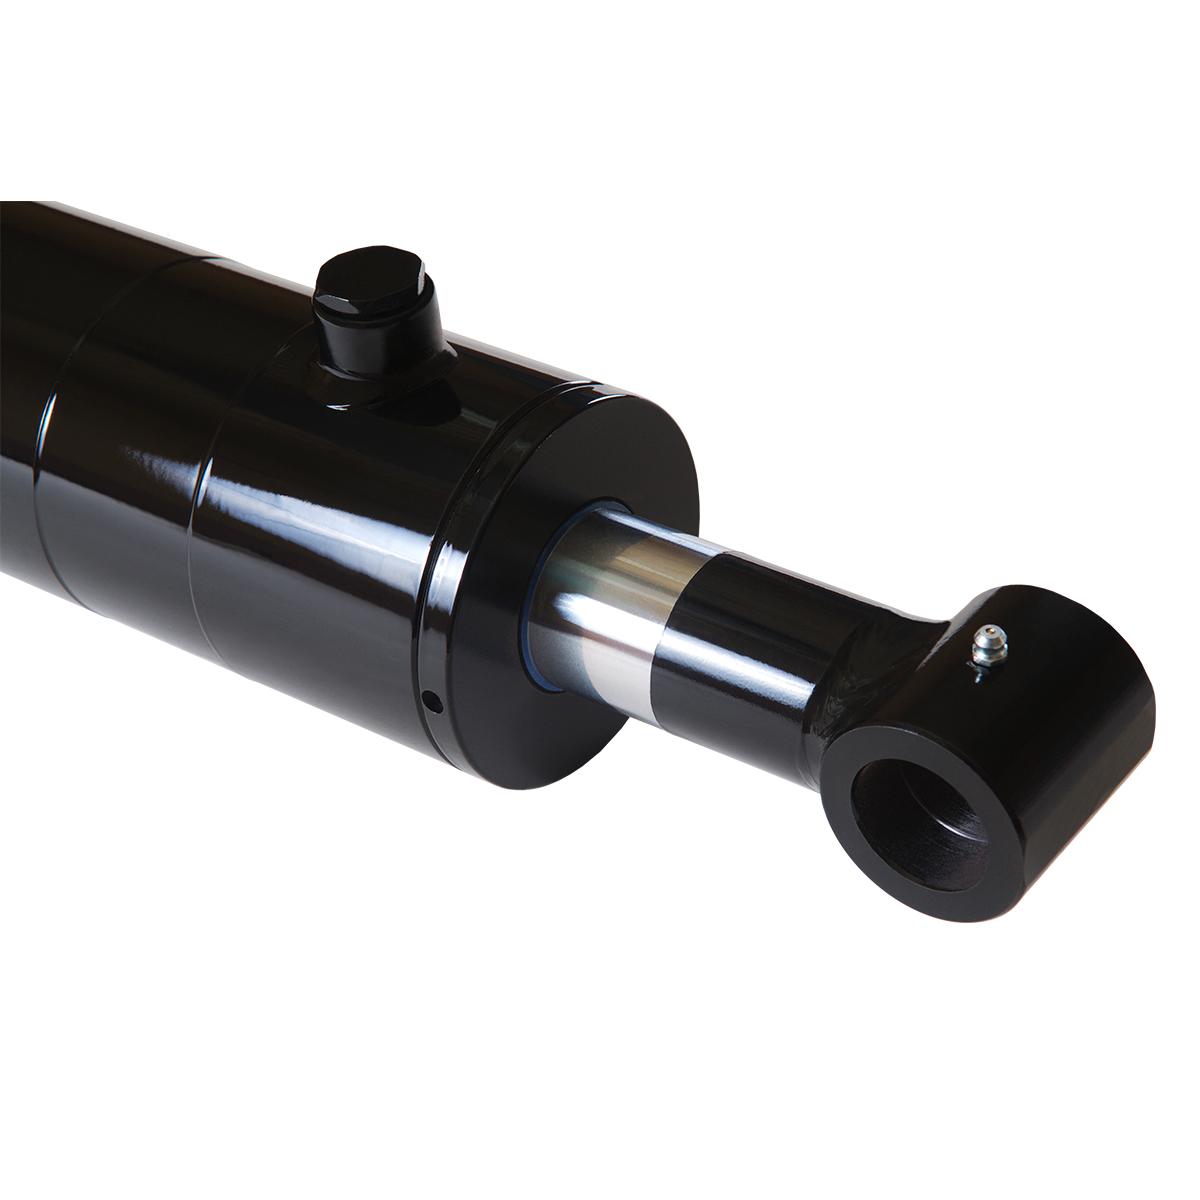 3.5 bore x 32 stroke hydraulic cylinder, welded cross tube double acting cylinder | Magister Hydraulics